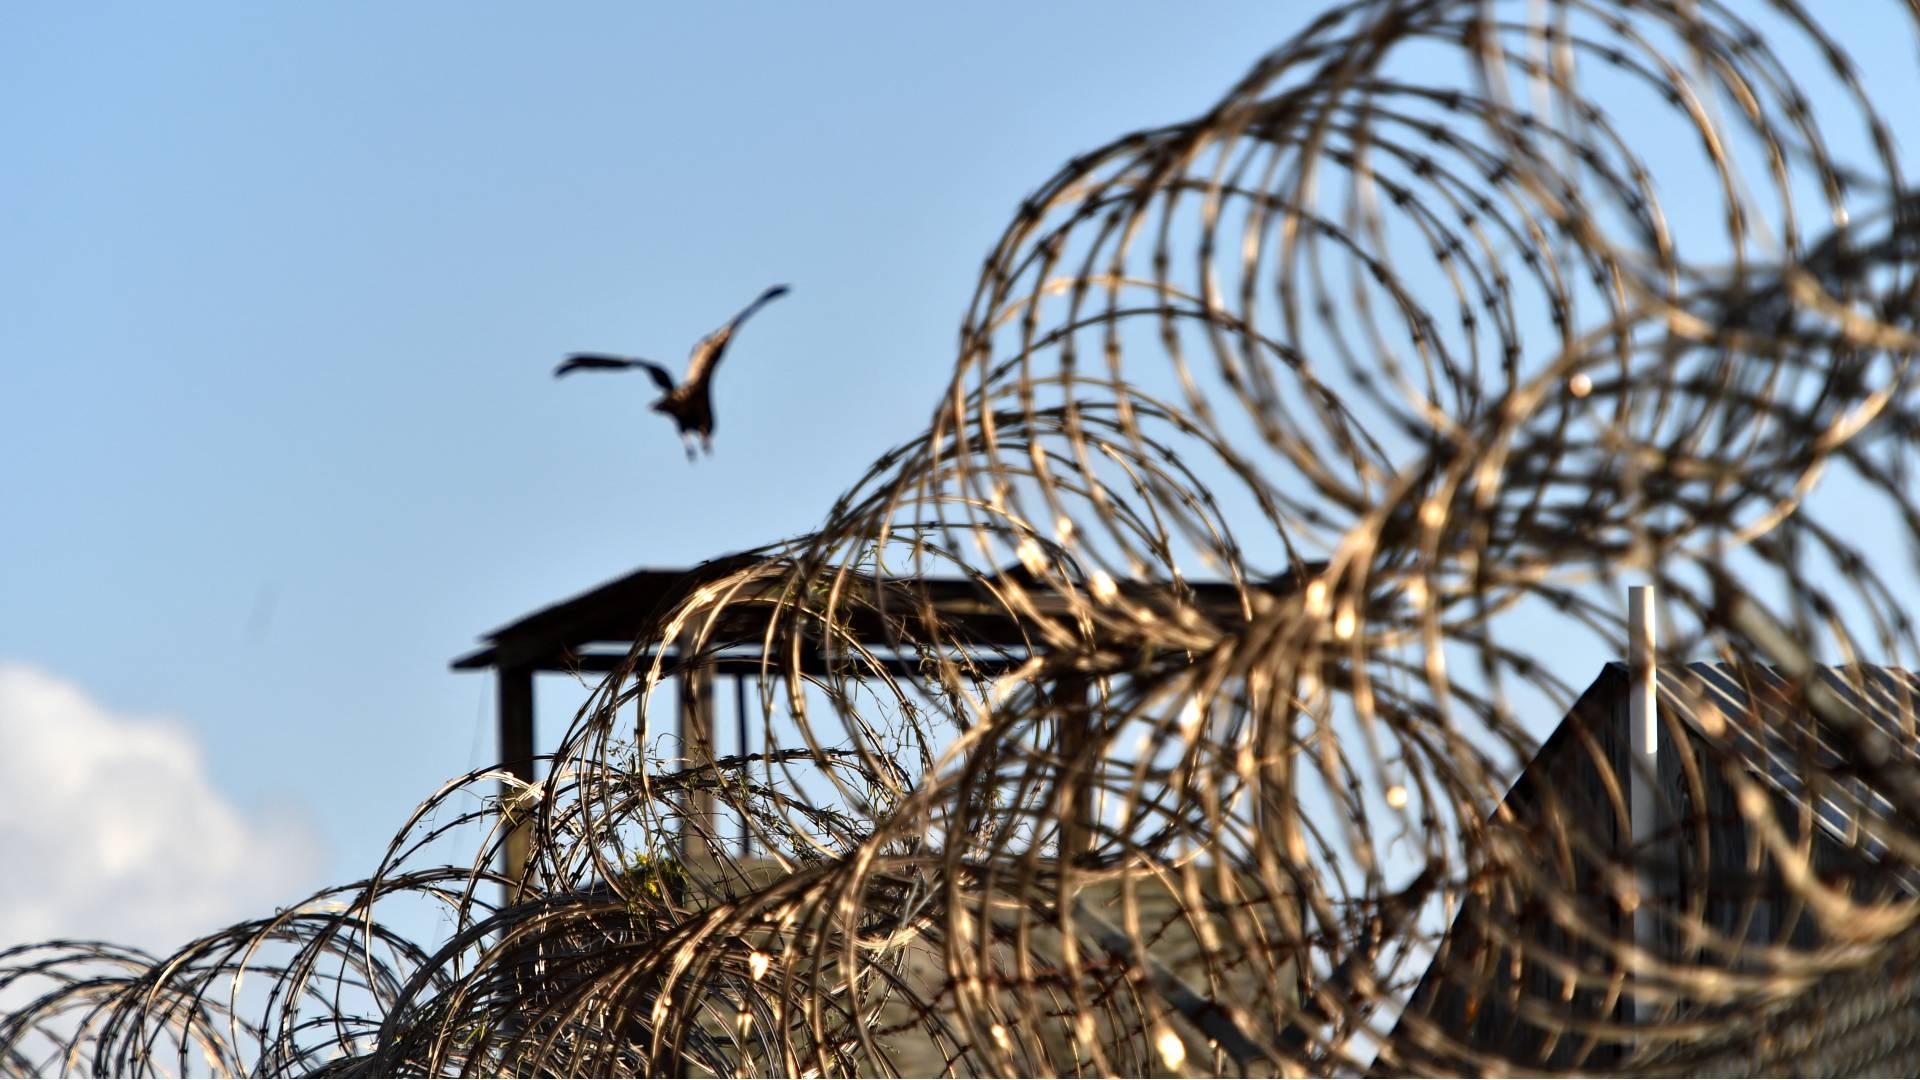 Around $540m of US taxpayer money is spent each year to hold the prisoners at Guantanamo.